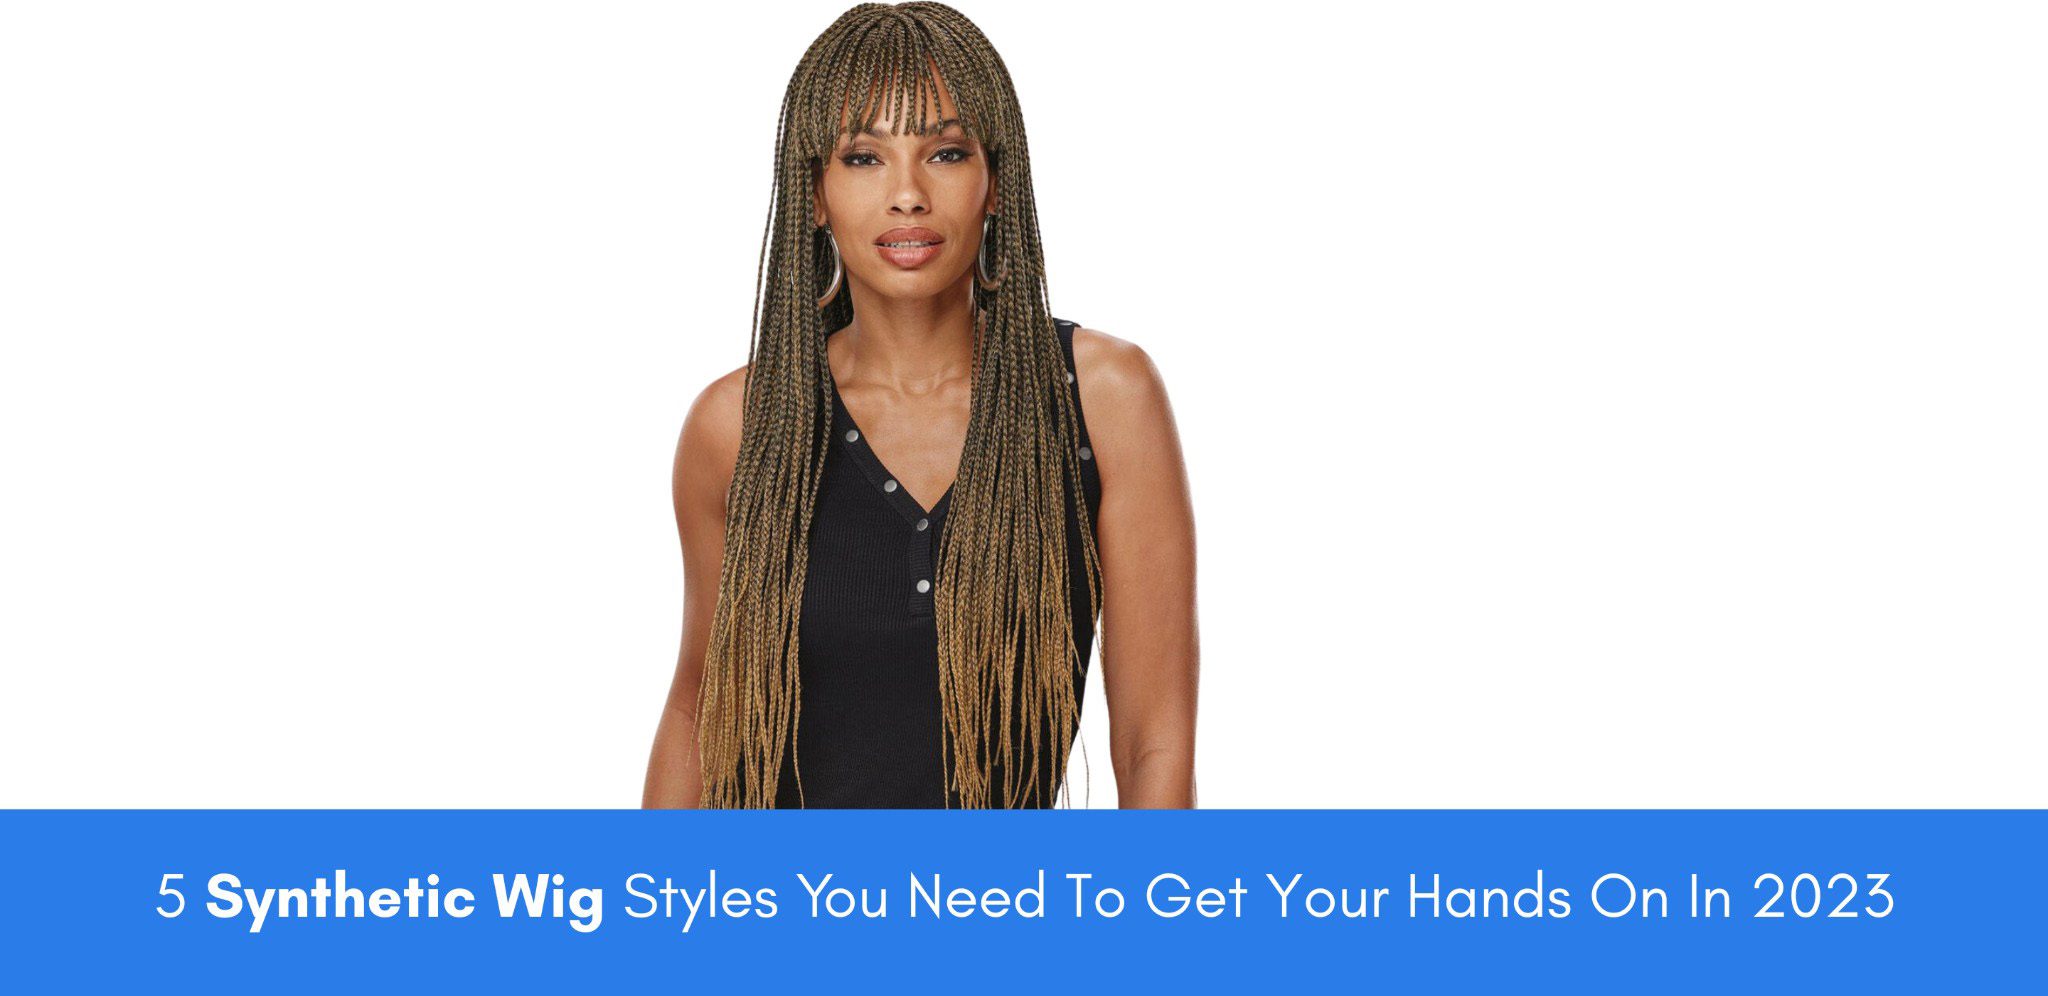 5 Synthetic Wig Styles You Need To Get Your Hands On In 2023